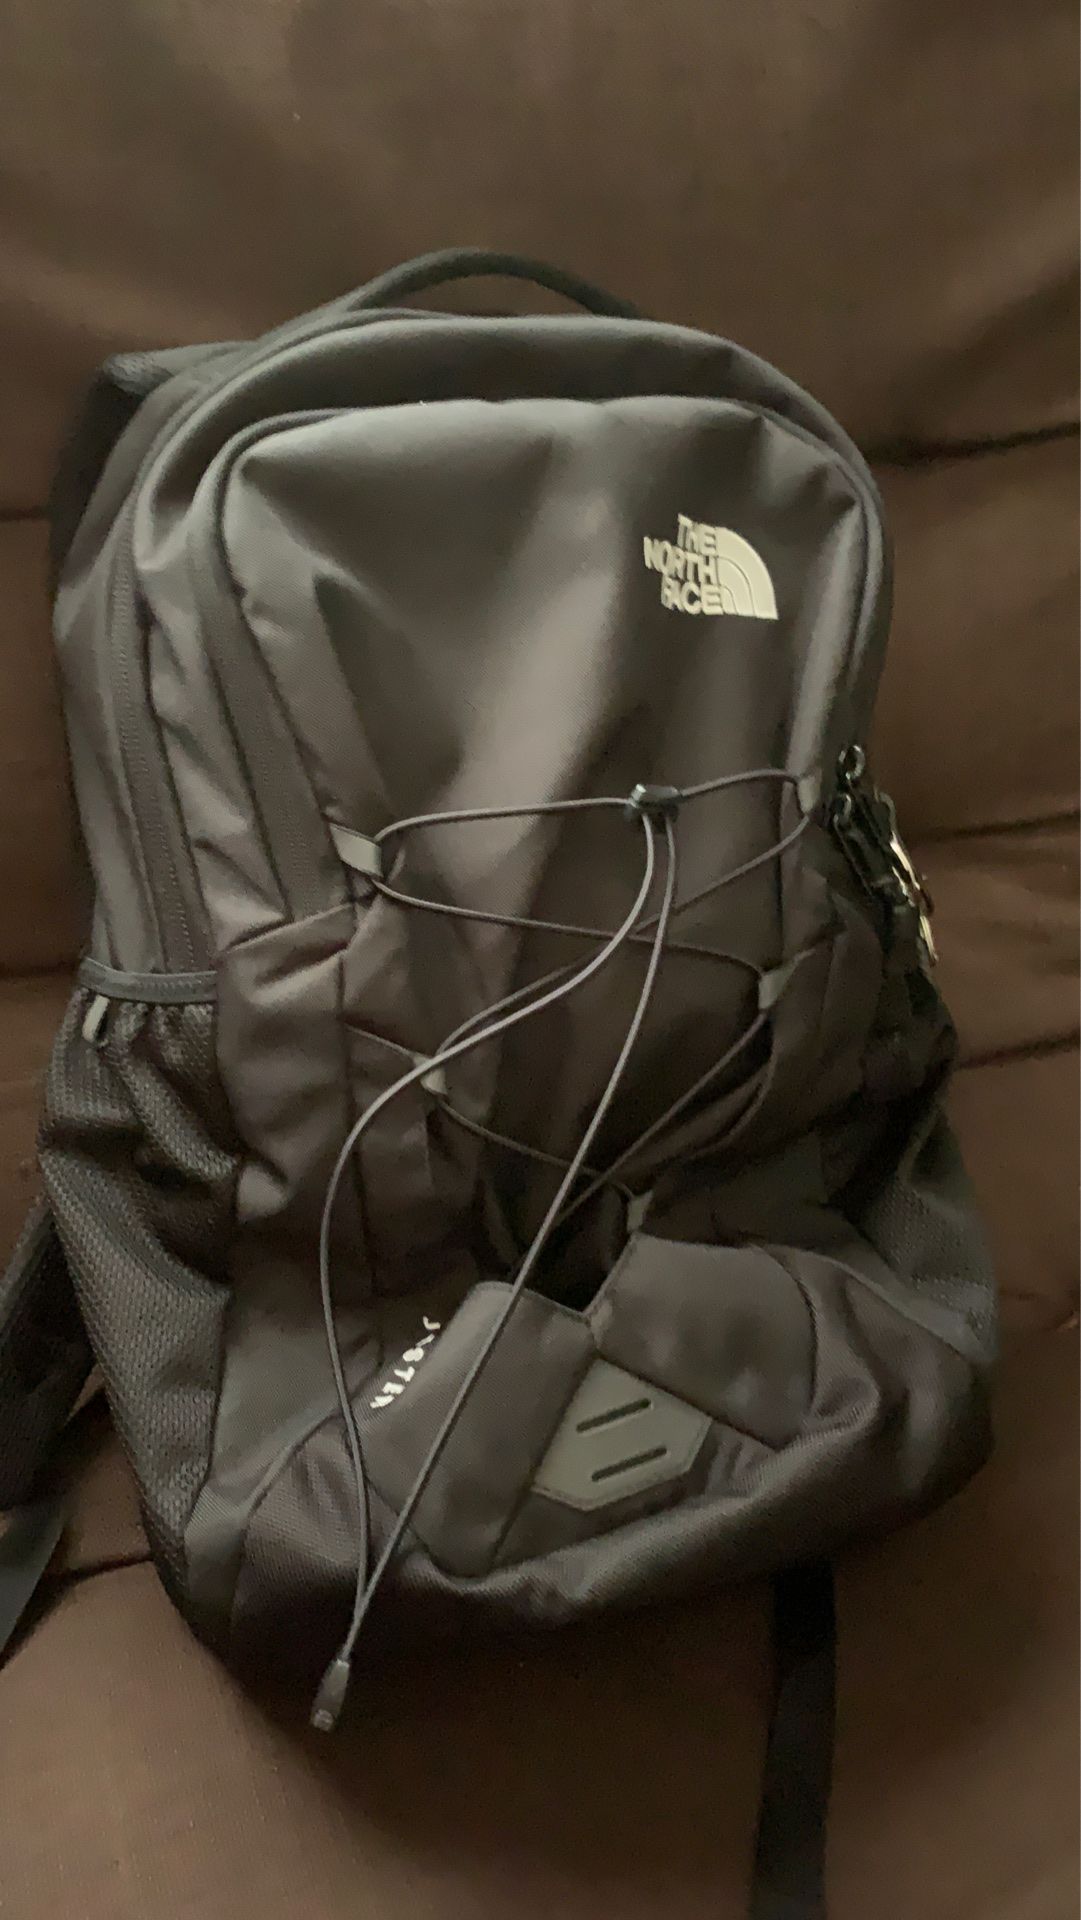 North face jester back pack with laptop sleeve I originally payed 110$ I never blew into the whistle either communicate with me to see more pictures